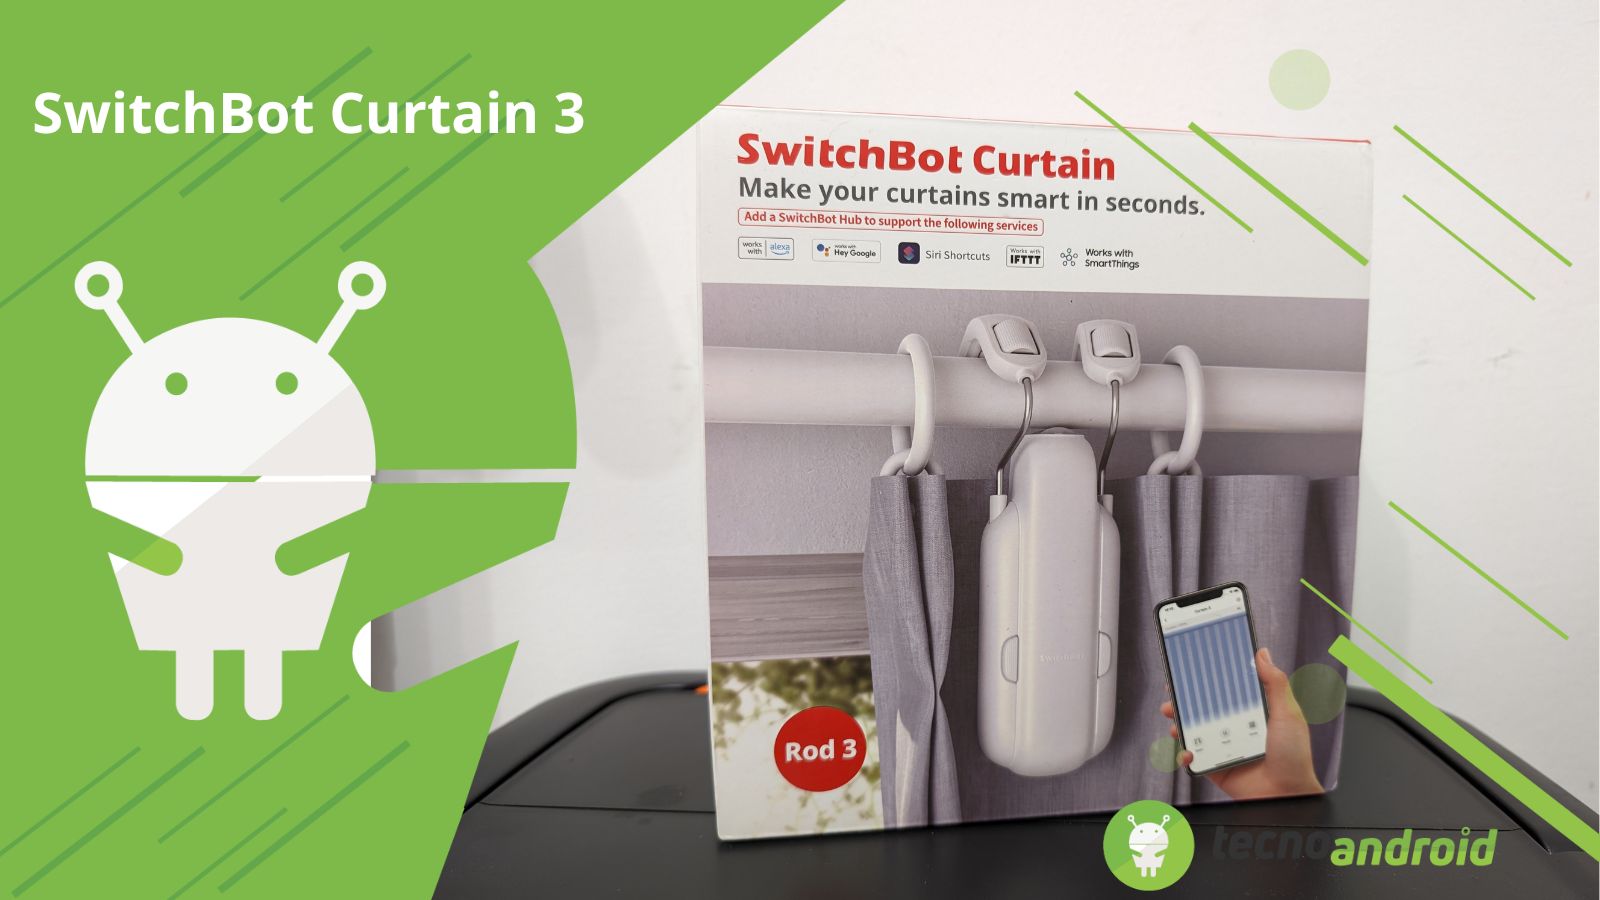 SwitchBot Curtain 3